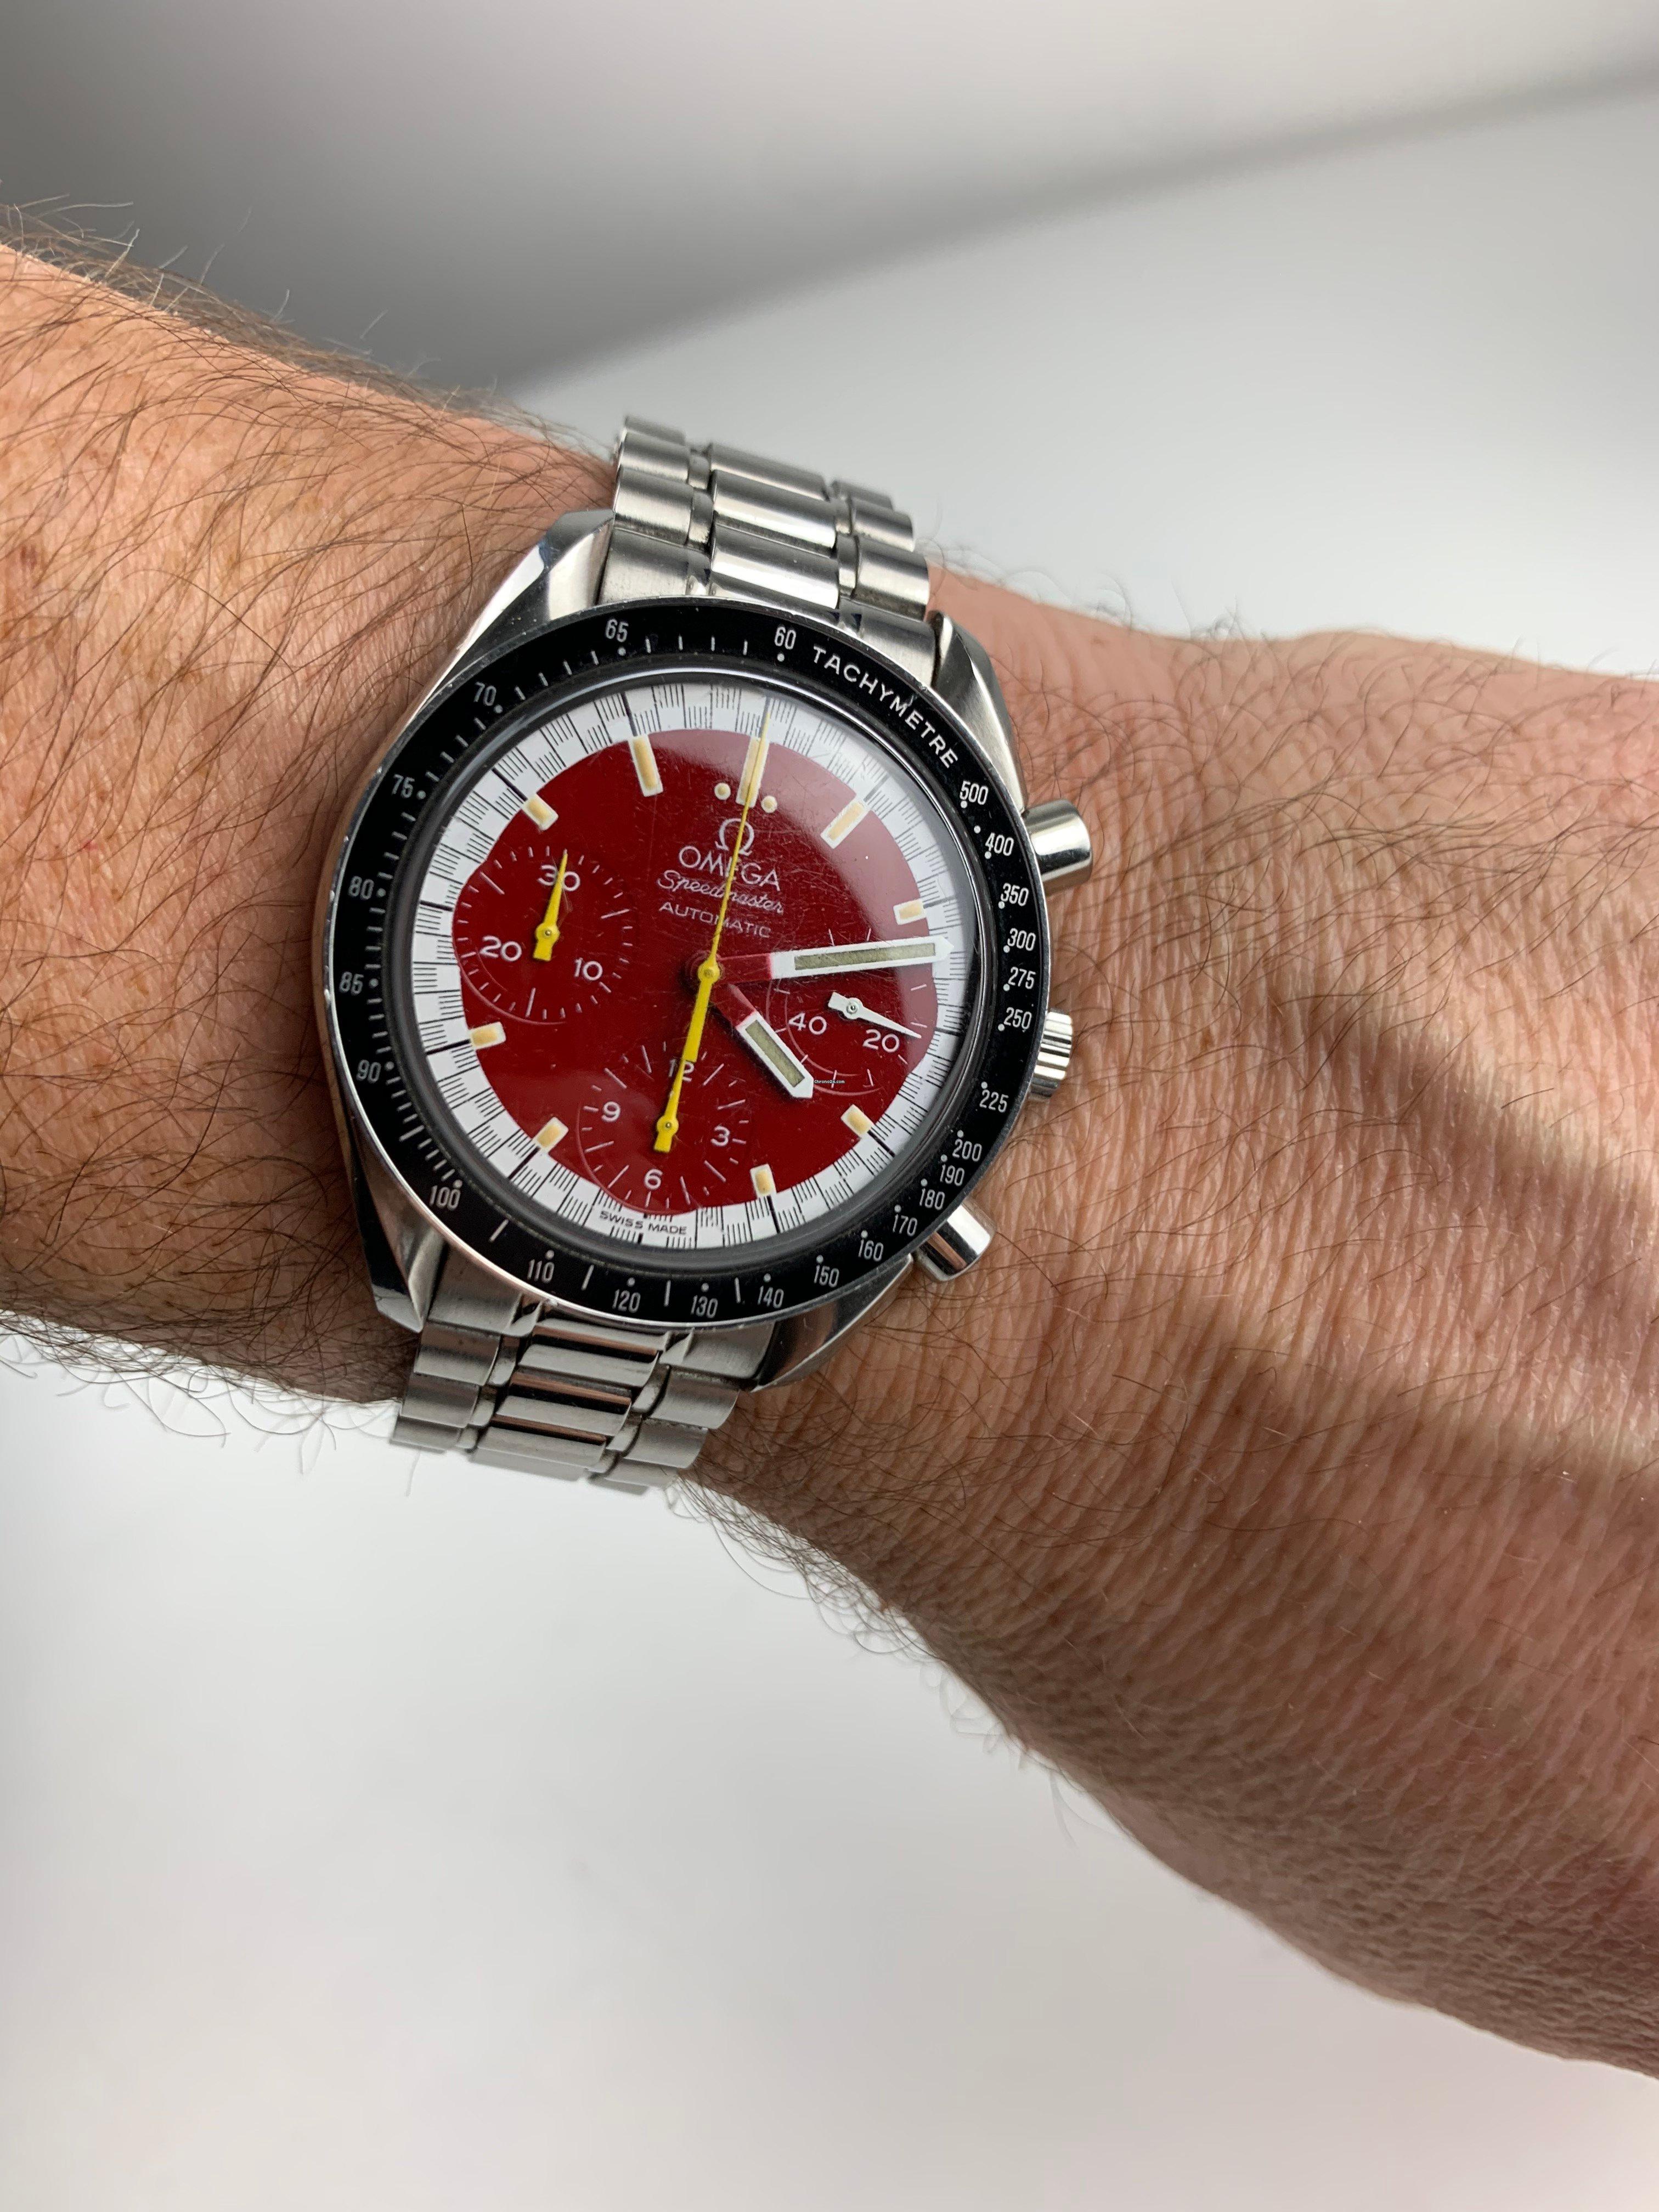 Original Omega Speedmaster Racing Red automatic steel Michael Schumacher Chronograph.
Full set box and papers.
39mm case diameter fold clasp.
In good condition.
Year of production 1996
Omega reference 3510.61.00
Location London, UK.
